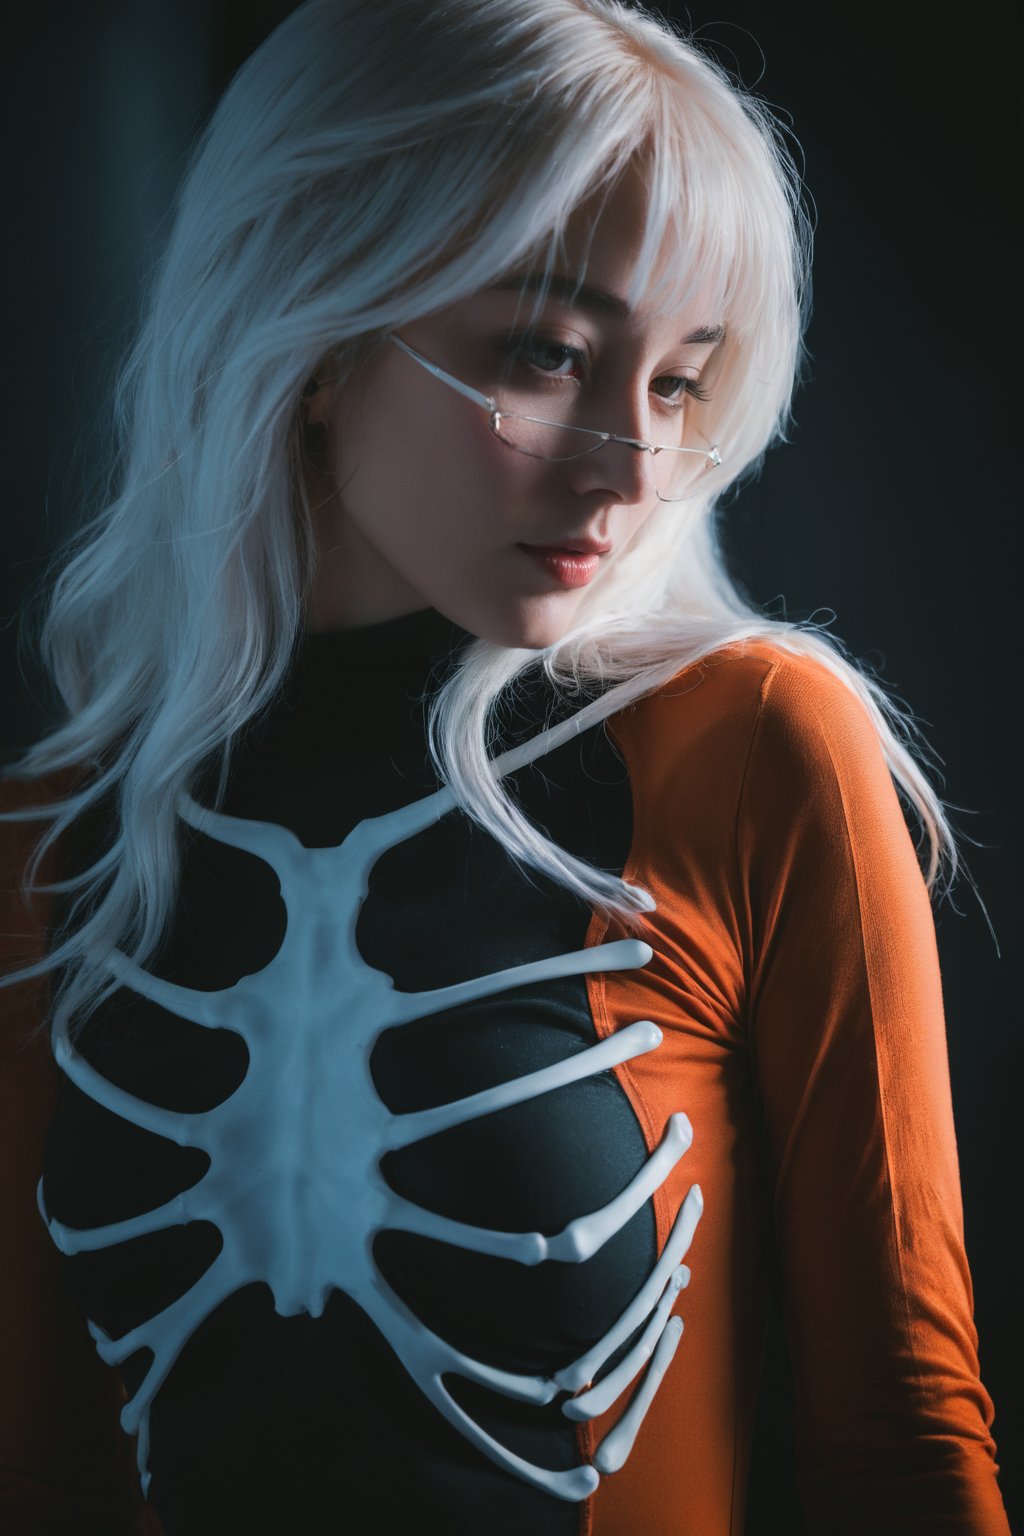  Masterpiece,high quality,(solo:1.2),((hubggirl)),(((human skeleton | girl))),(white hair:0.3),cinematic light,orange clothes,detailed environment,1girl,solo,reflection,upper body,sunlight,(White hair:1.2),very long hair,wide sleeves,Deep photo,depth of field,shadows,messy hair,seductive silhouette play,dark,nighttime,dark photo,grainy,dimly lit,bangs,Cinematic Lighting,Tyndall effect,abstract background,vibrant colors,modern style,artistic,dynamic composition,unique patterns,bold textures,colorful,lively,youthful,energetic,creative,expressive,stylish,trendy,white_marble_glowing_skin,